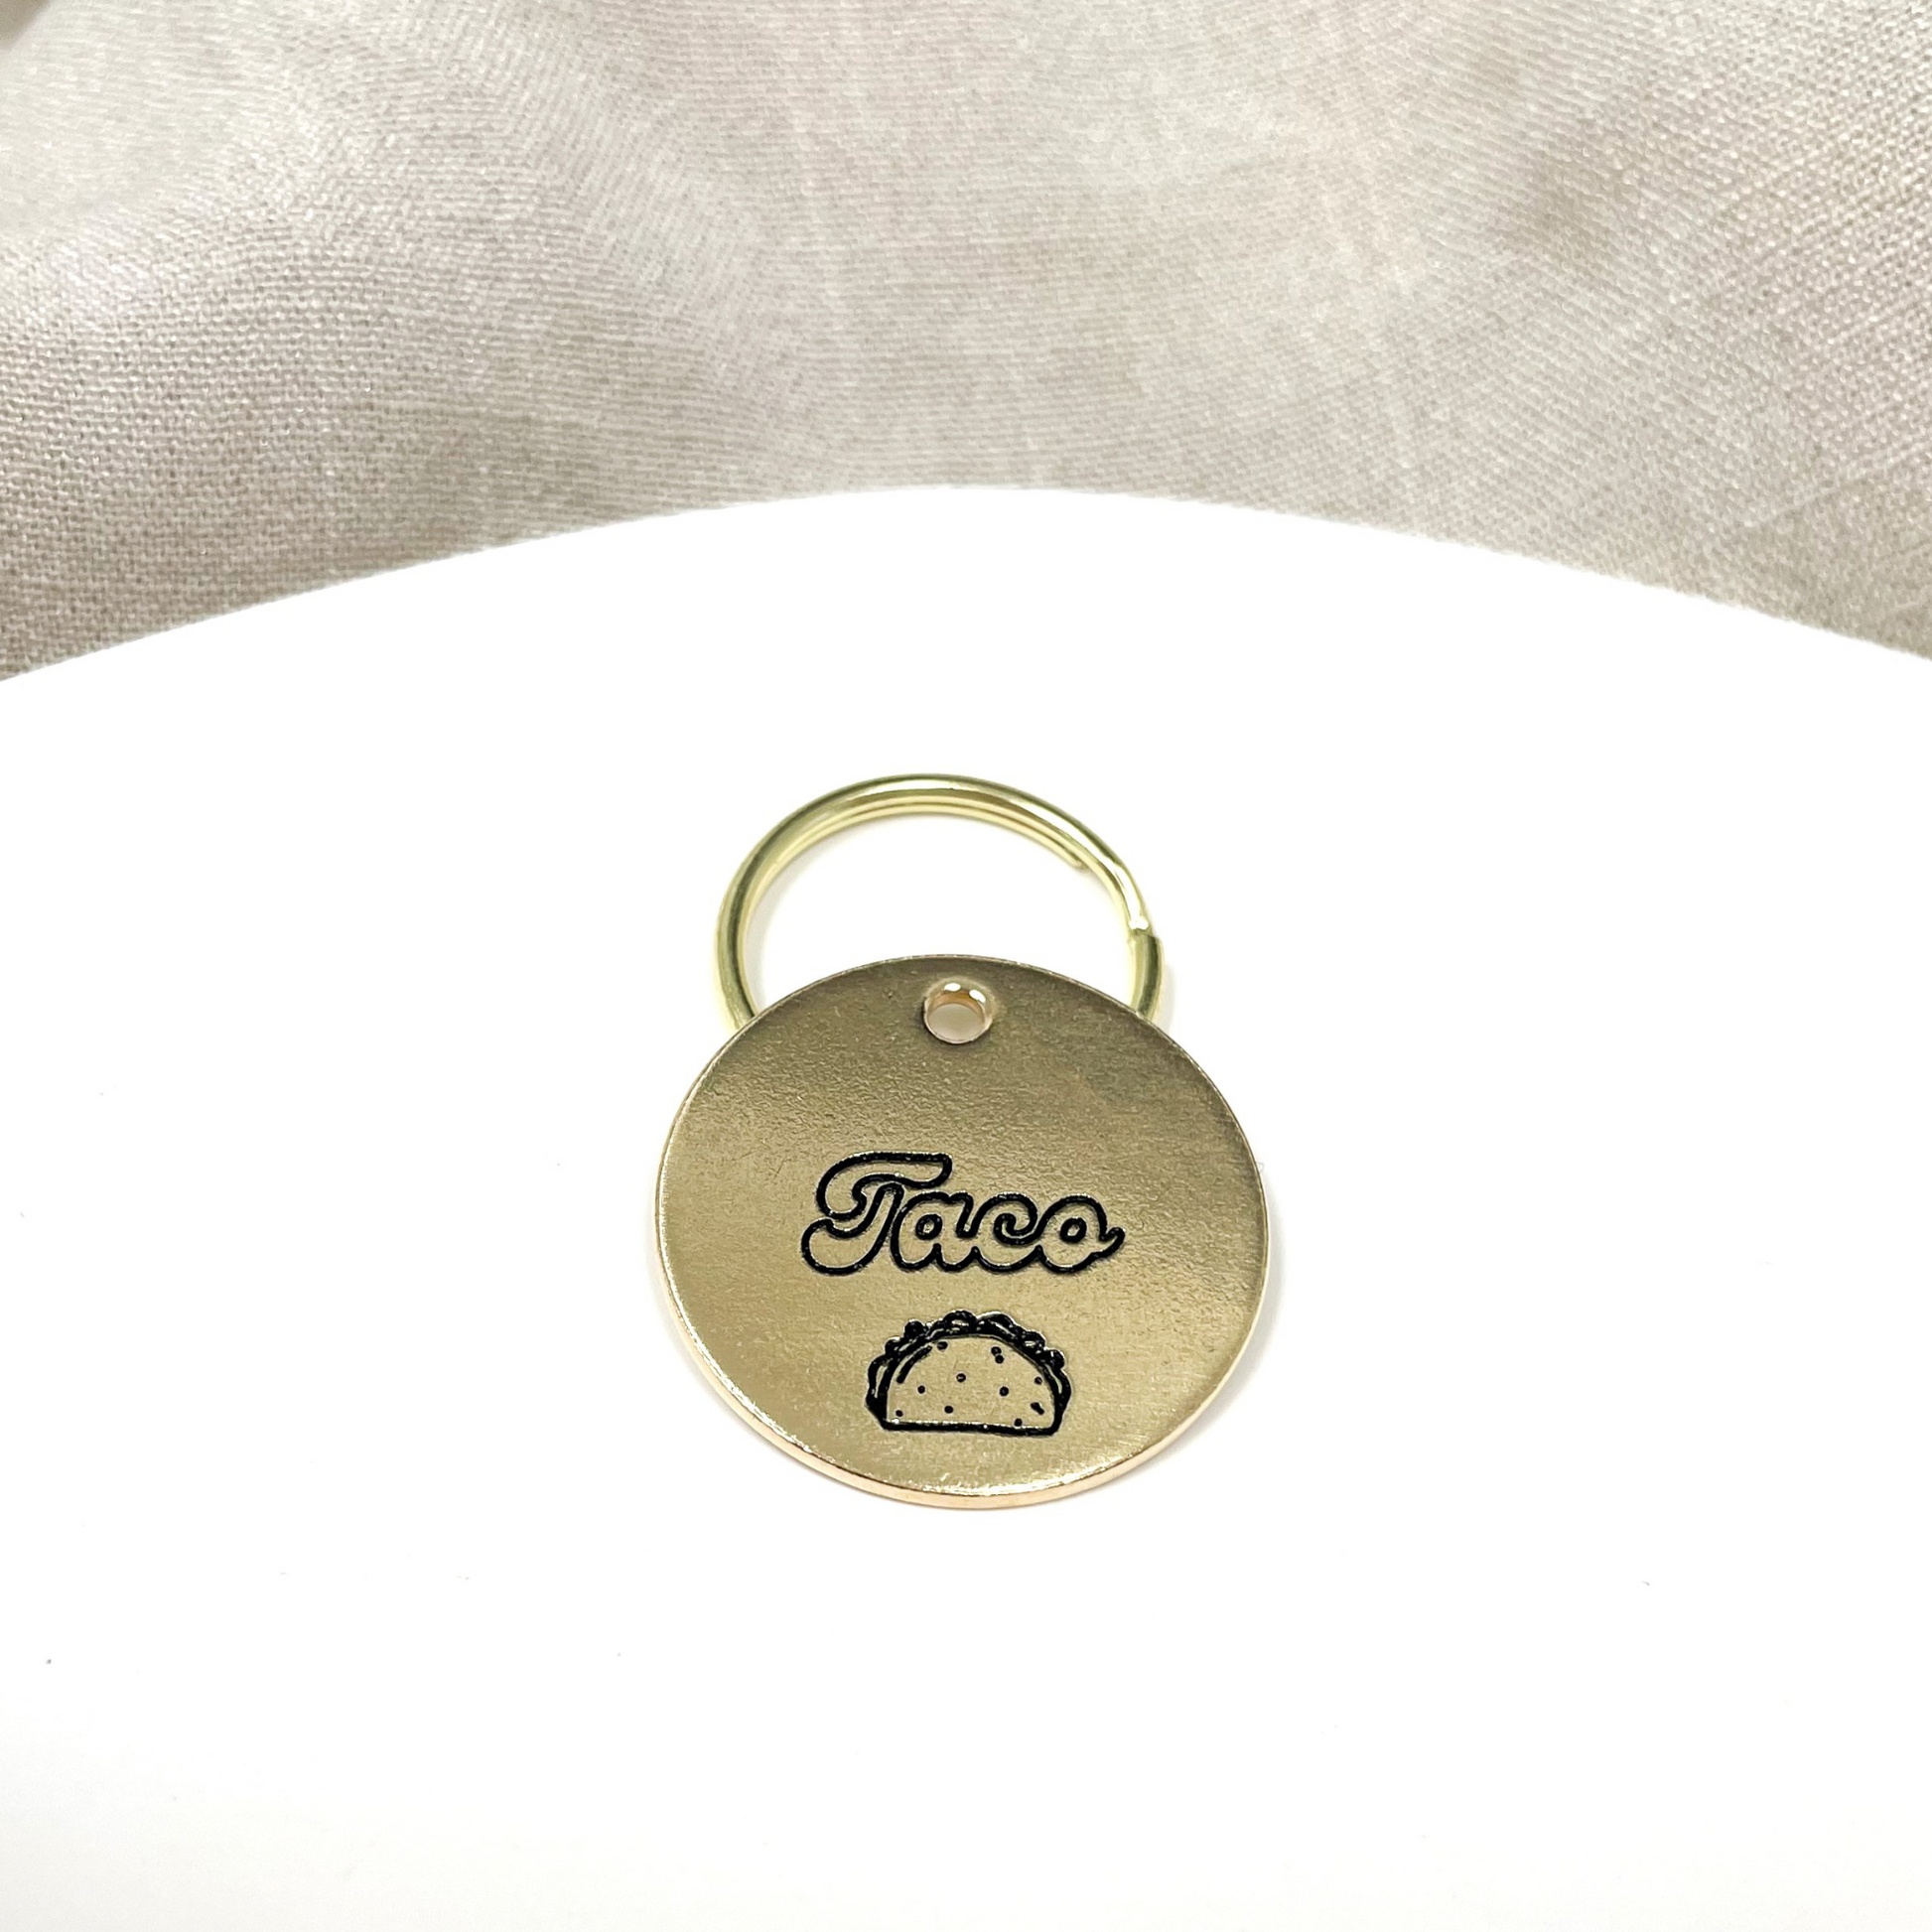 Taco Design Engraved Dog Tag - Cat ID Tag - Dog Collar Tag - Custom Dog Tag - Personalized Tag - Pet ID Tag - Pet Name Tag - Cat Collar Tag - Pet name on front with a taco design. Your phone number will be on the back.